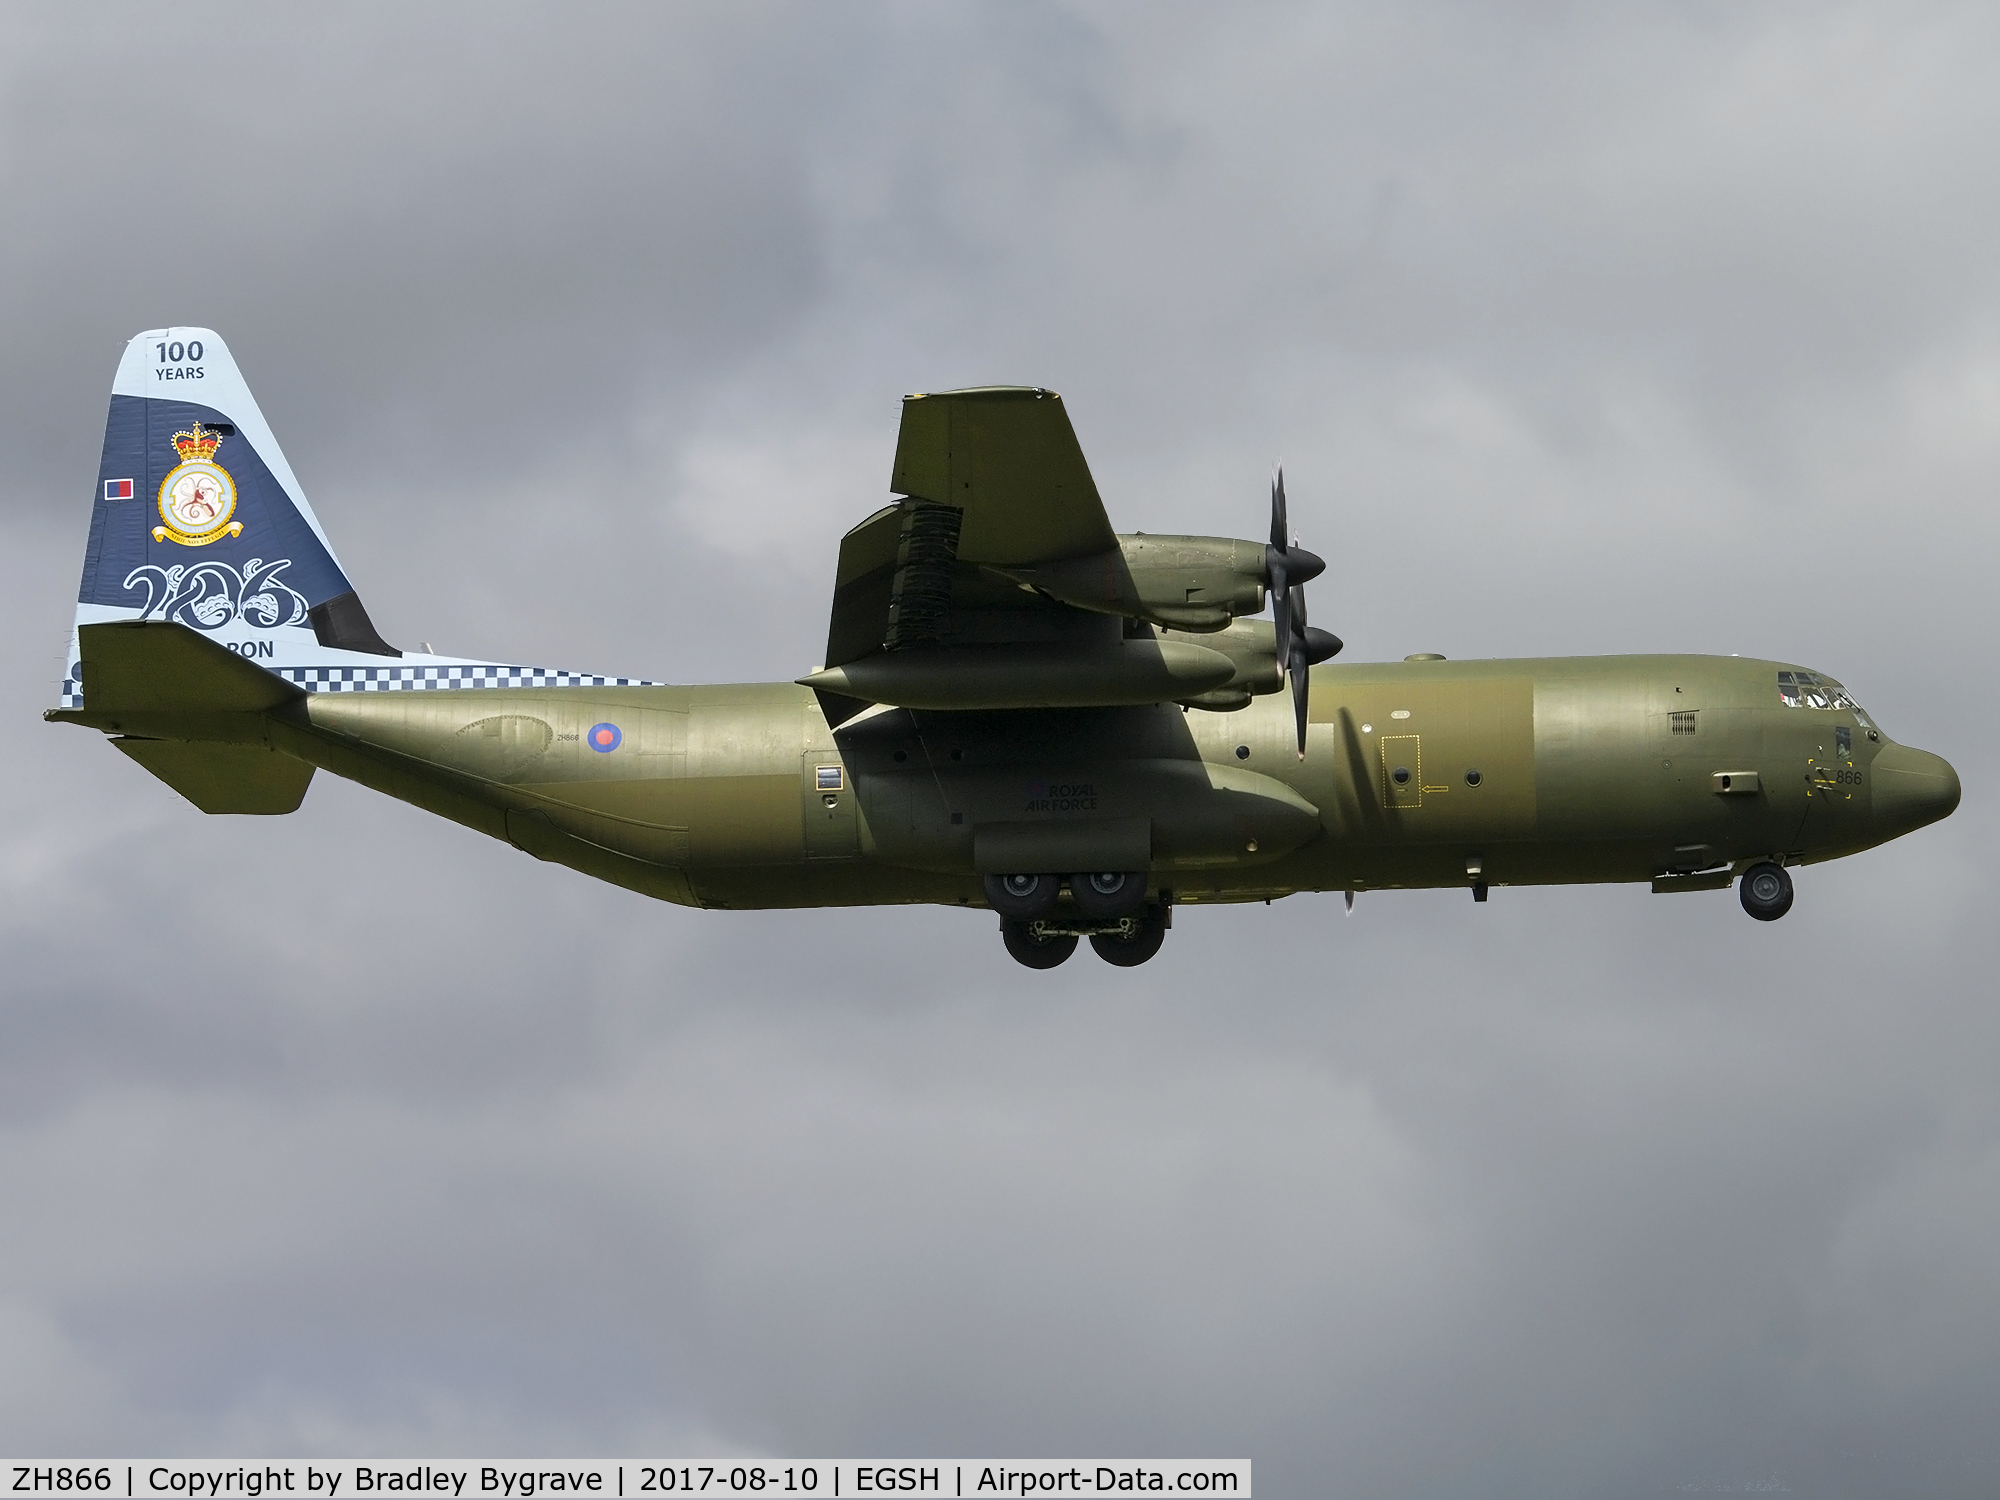 ZH866, 1996 Lockheed Martin C-130J-30 Hercules C.4 C/N 382-5414, Special Tail on approach in some sun!